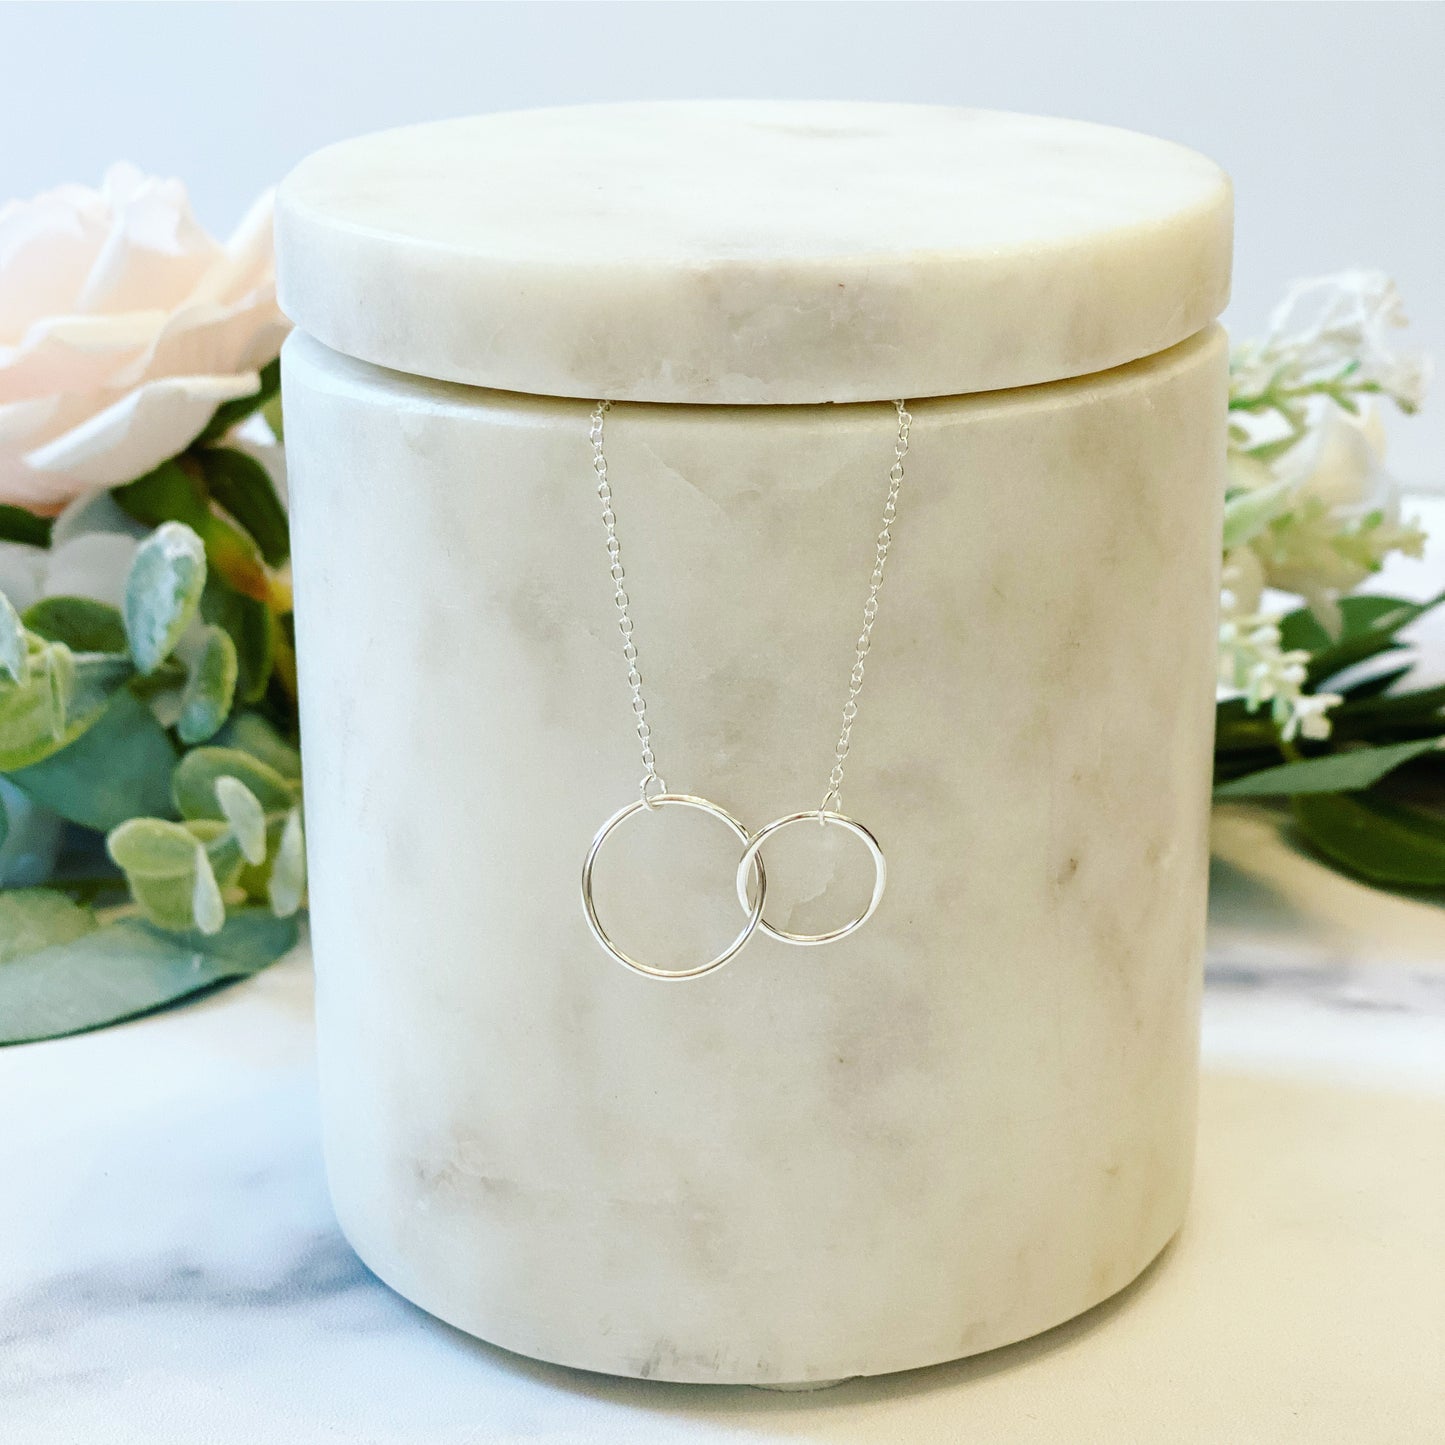 Can't Say "I Do" Without You! Infinity Necklace